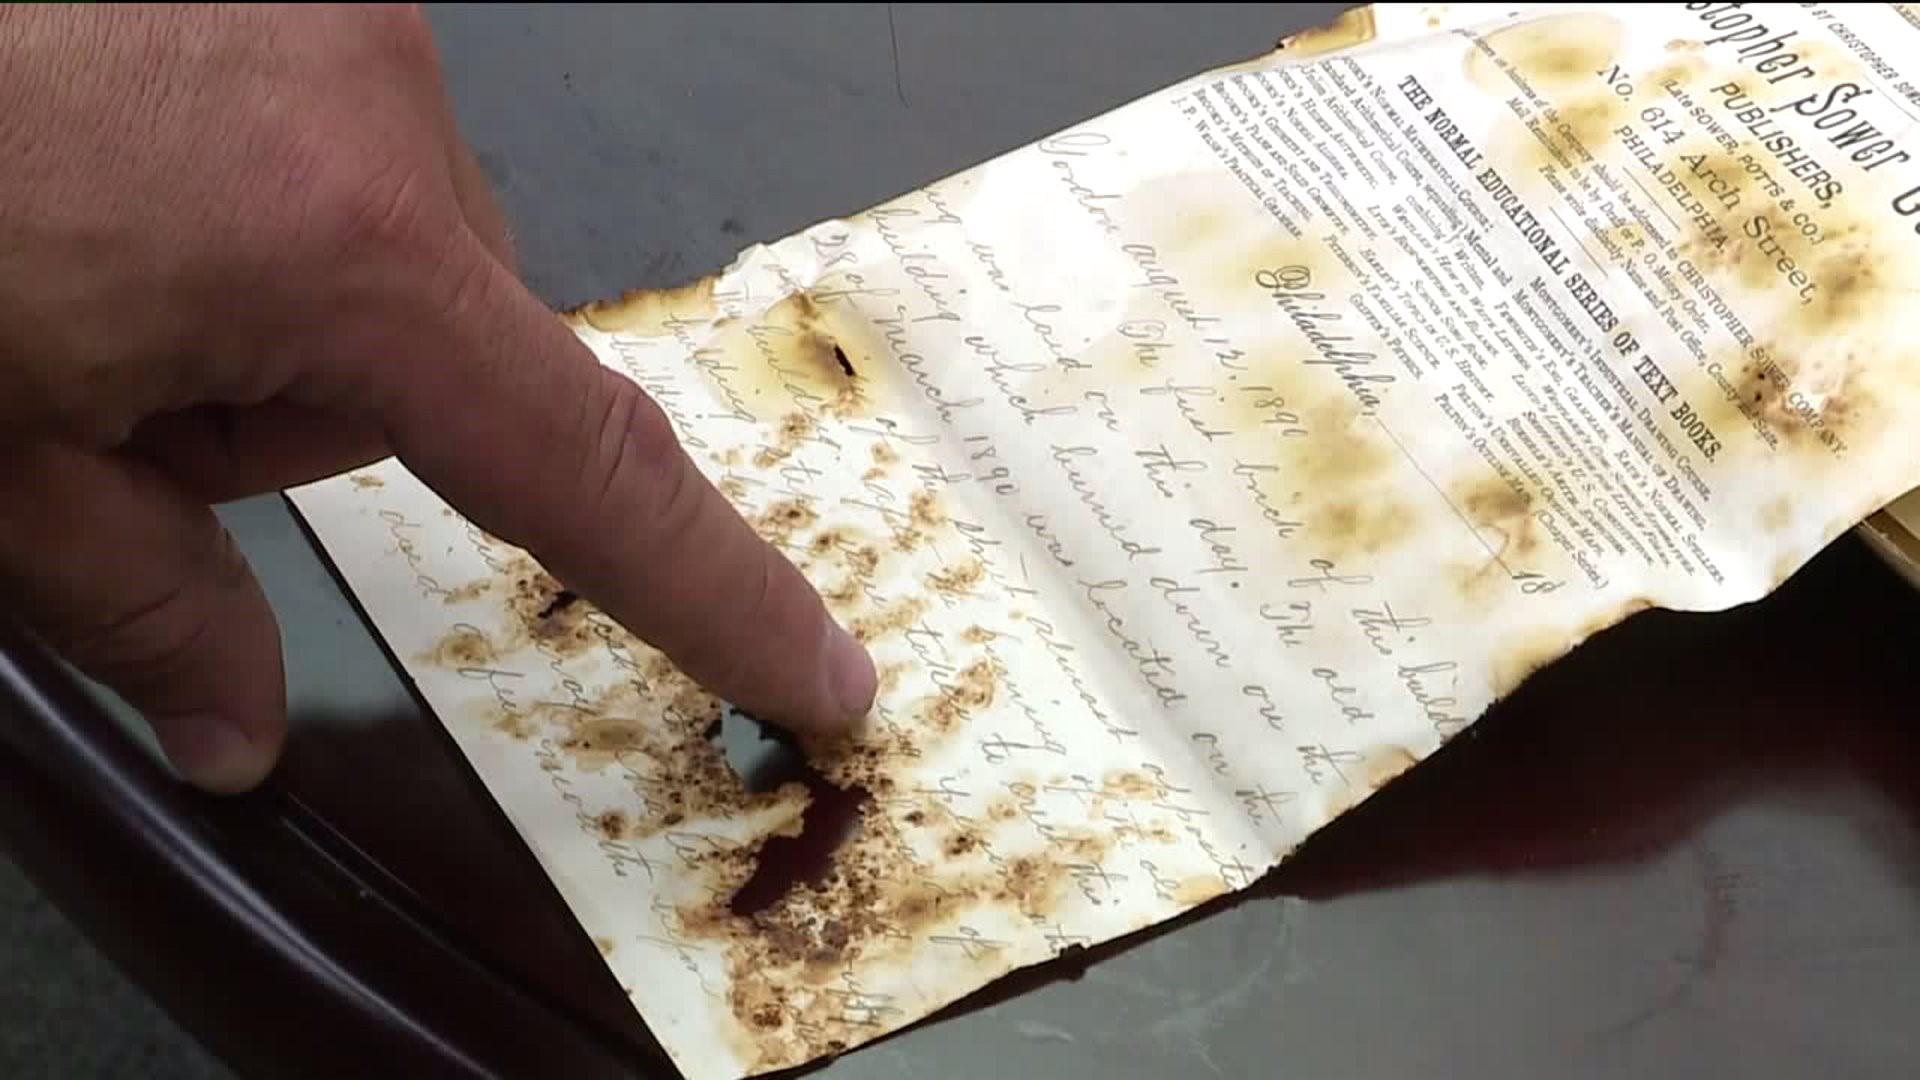 128-year-old Time Capsule Opened in Schuylkill County